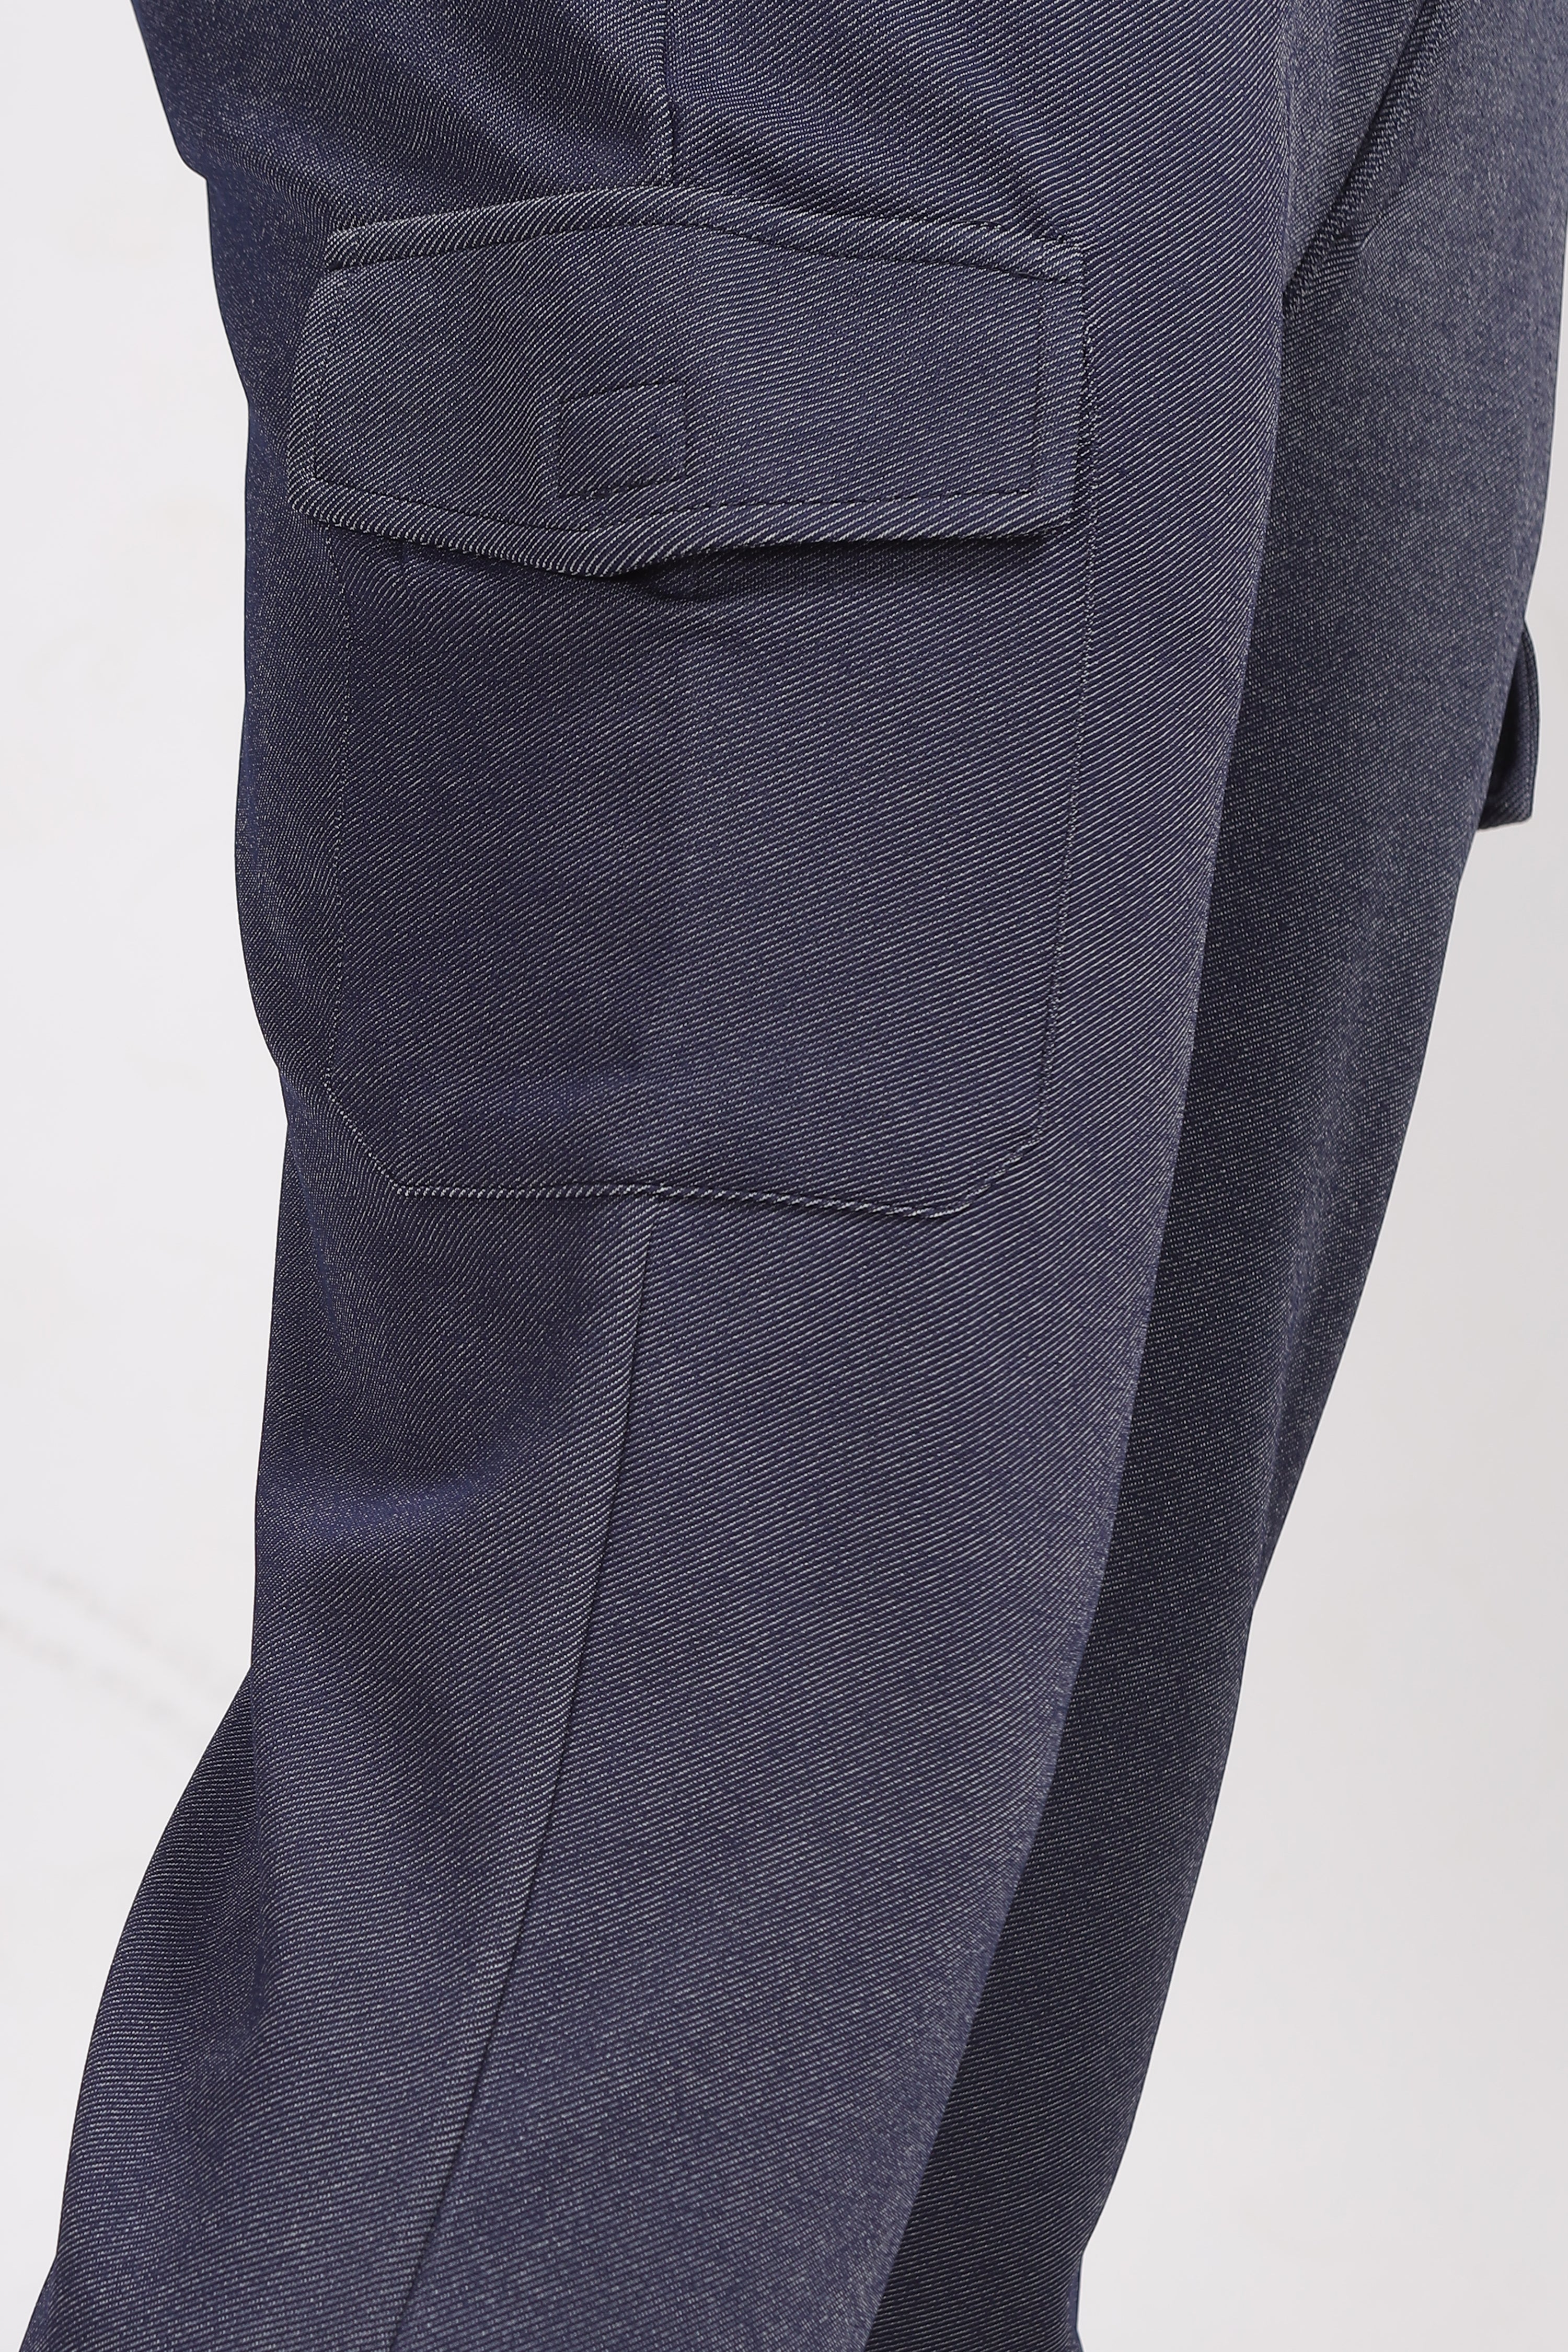 Navy Blue Cargo Style Track Pants